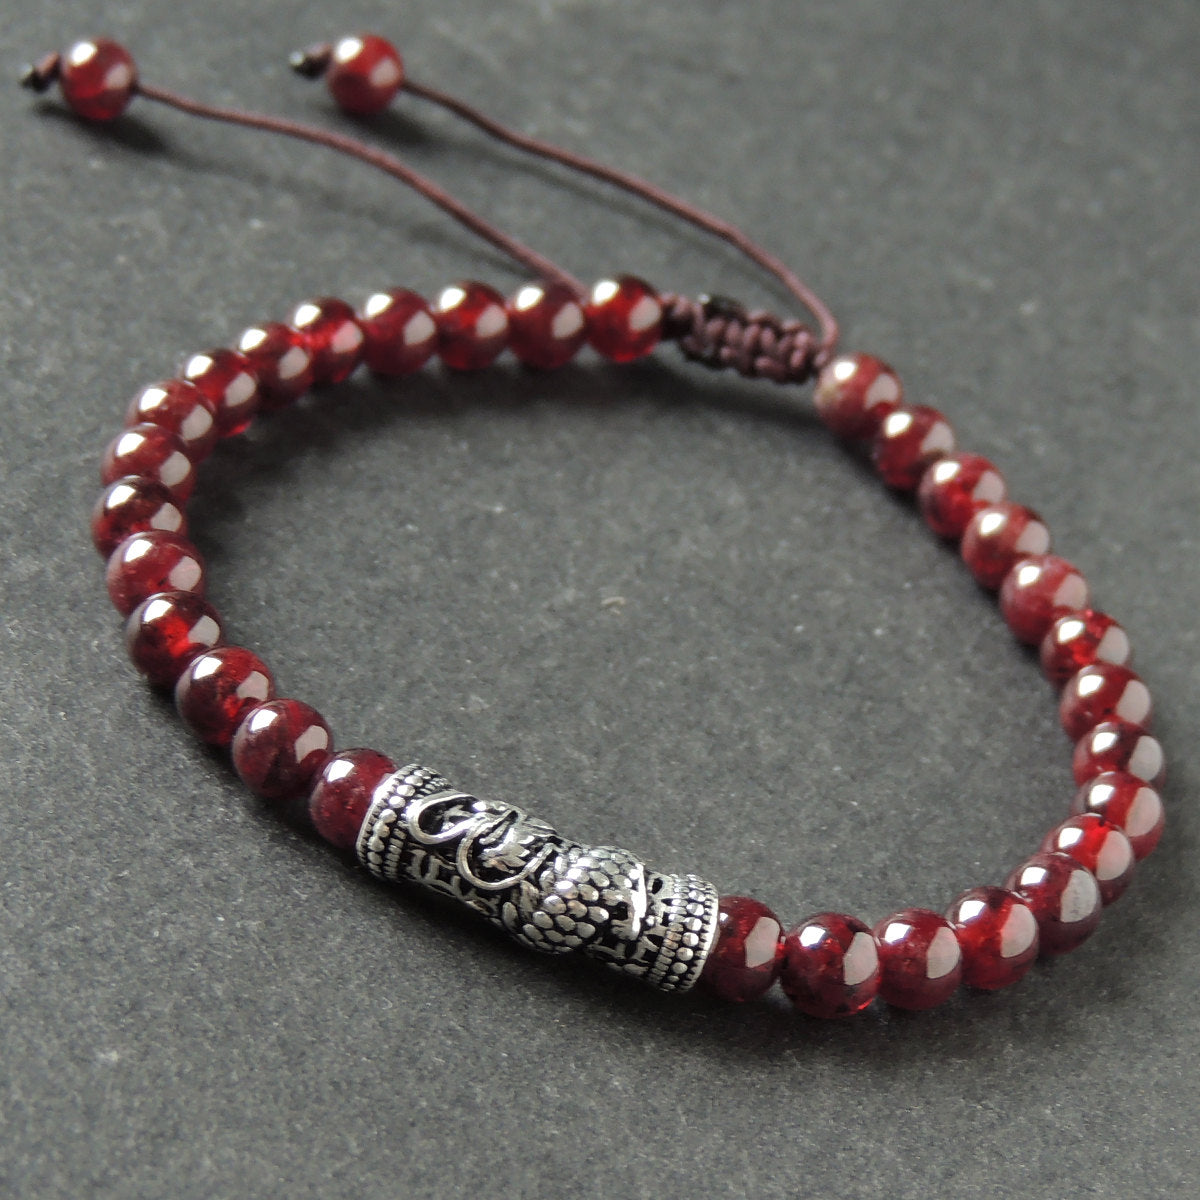 THE ROOT 1ST MULADHARA BASE OF SPINE HEALING GEMSTONE RED GARNET BRACELET FOR MEN'S WOMEN'S, JANUARY BIRTHSTONE JEWELRY WITH 925 STERLING SILVER JAPANESE PROTECTION DRAGON CHARM